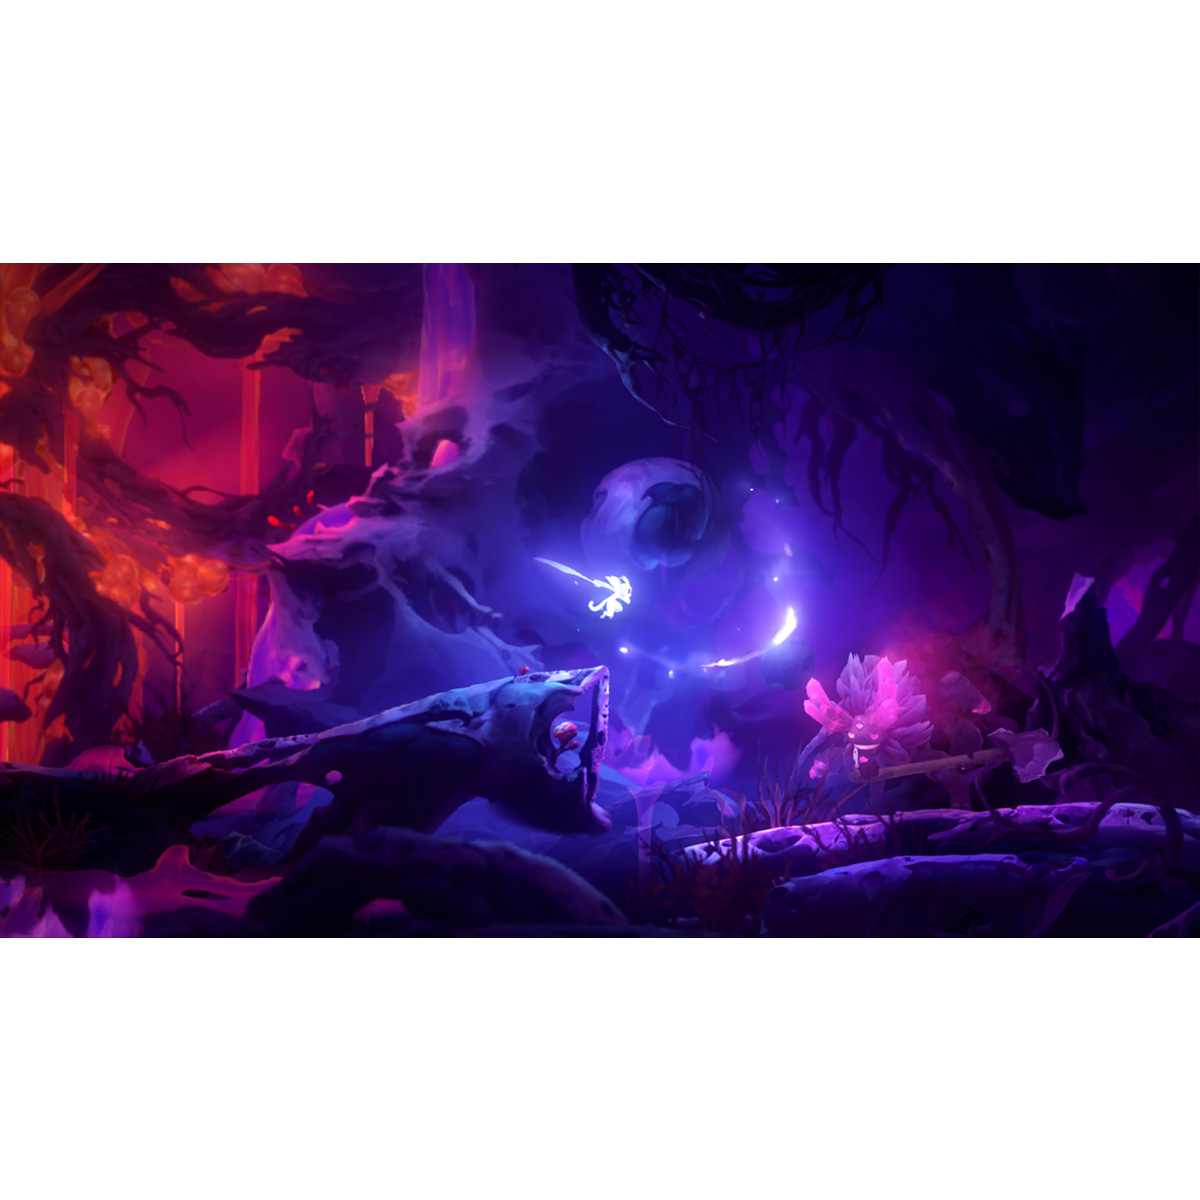 ［Switch］ Ori and the Will of the Wisps